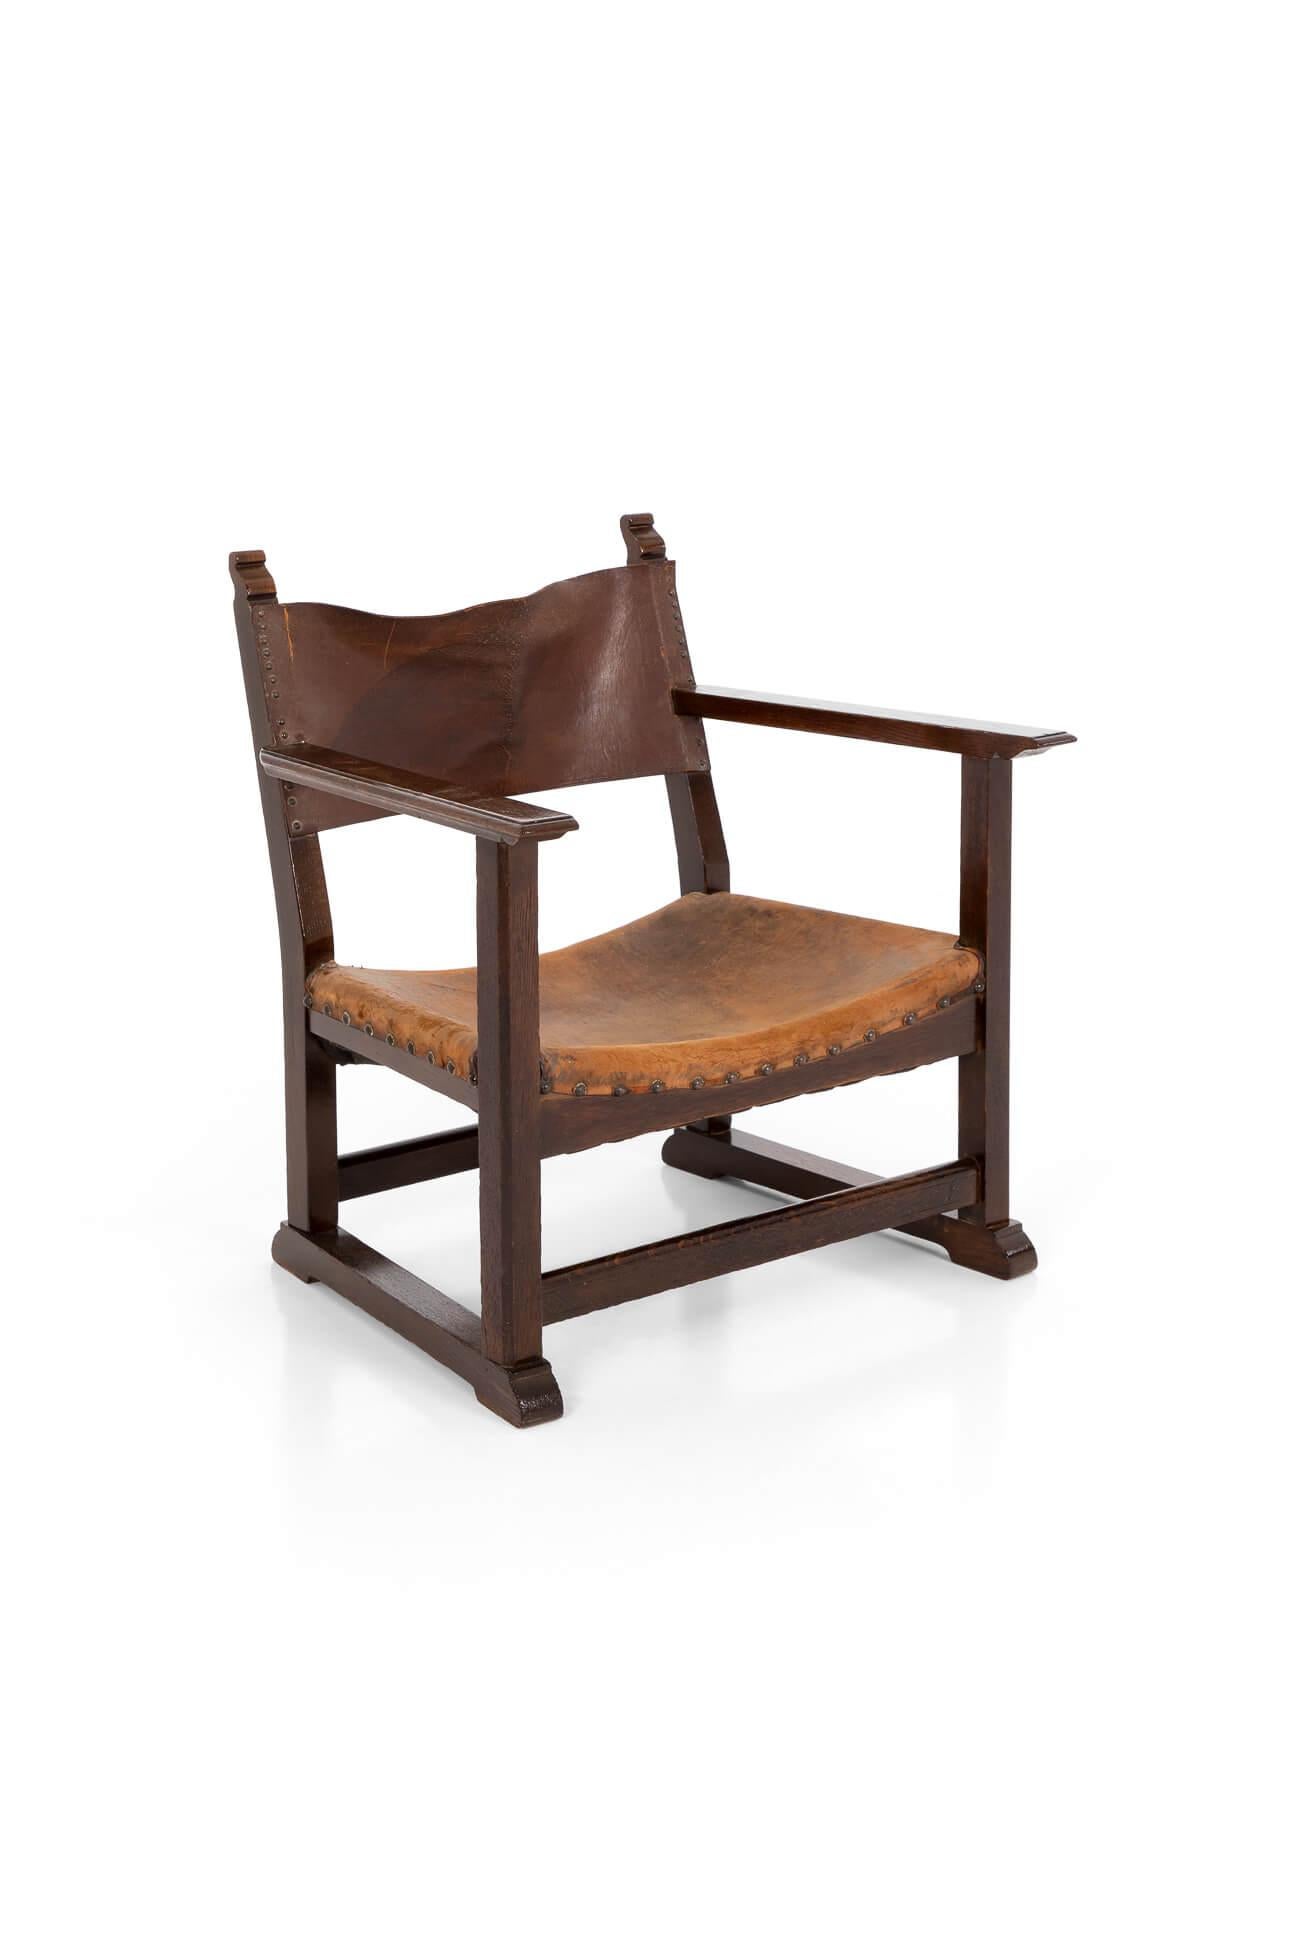 A wonderful Adolf Loos and Heinrich Kulka fireside chair for Friedrich Otto Schmidt in walnut. The fireside or chimney chair is considered one of the most important designs from the Arts and Crafts movement. Adolf Loos was one of the great pioneers